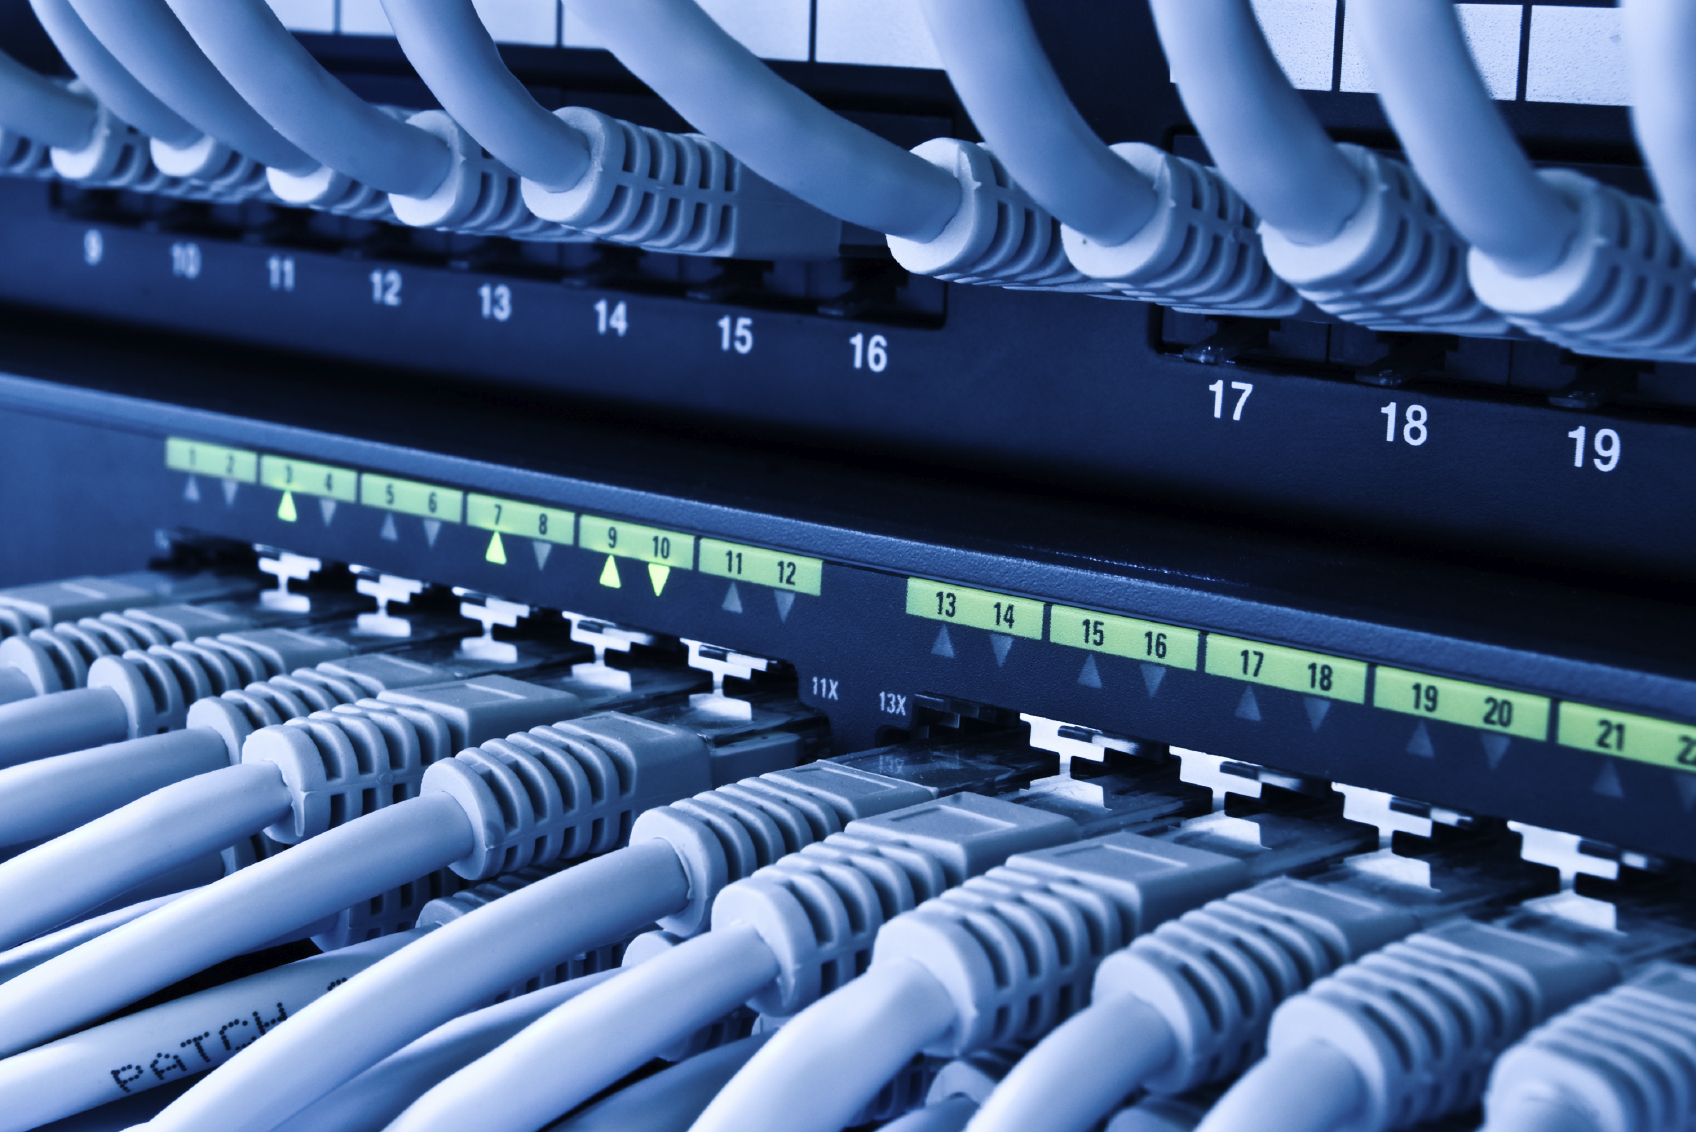 Networking Infrastructure & Data Cabling